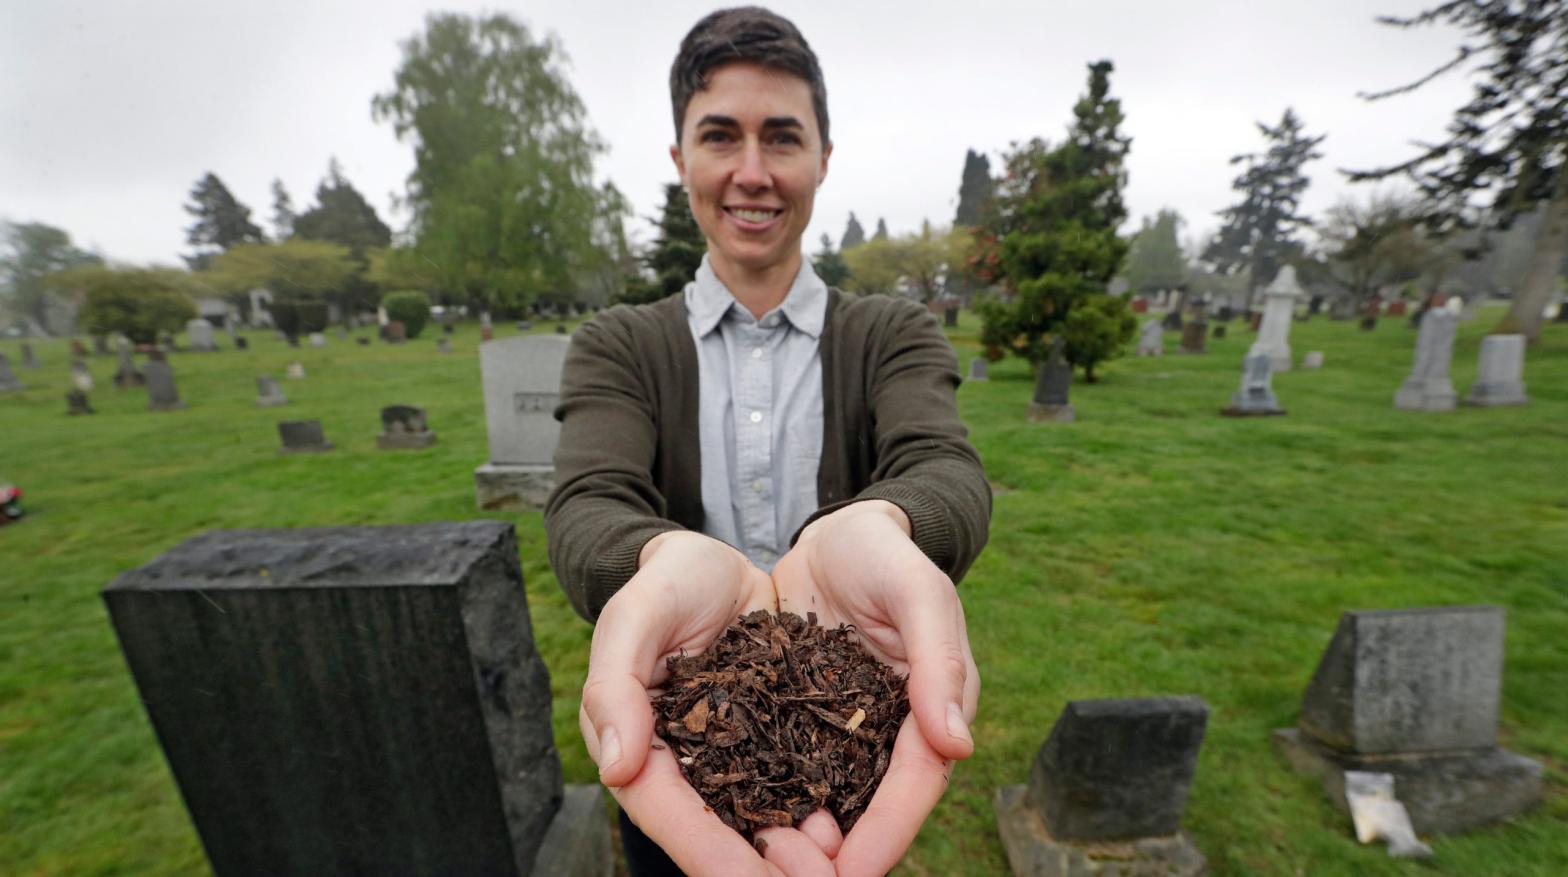 Katrina Spade, the founder and CEO of Recompose, showing off the wood shavings and other plant mulch used to help bodies compost in a photo taken in April 2019 (Photo: Elaine Thompson, AP)